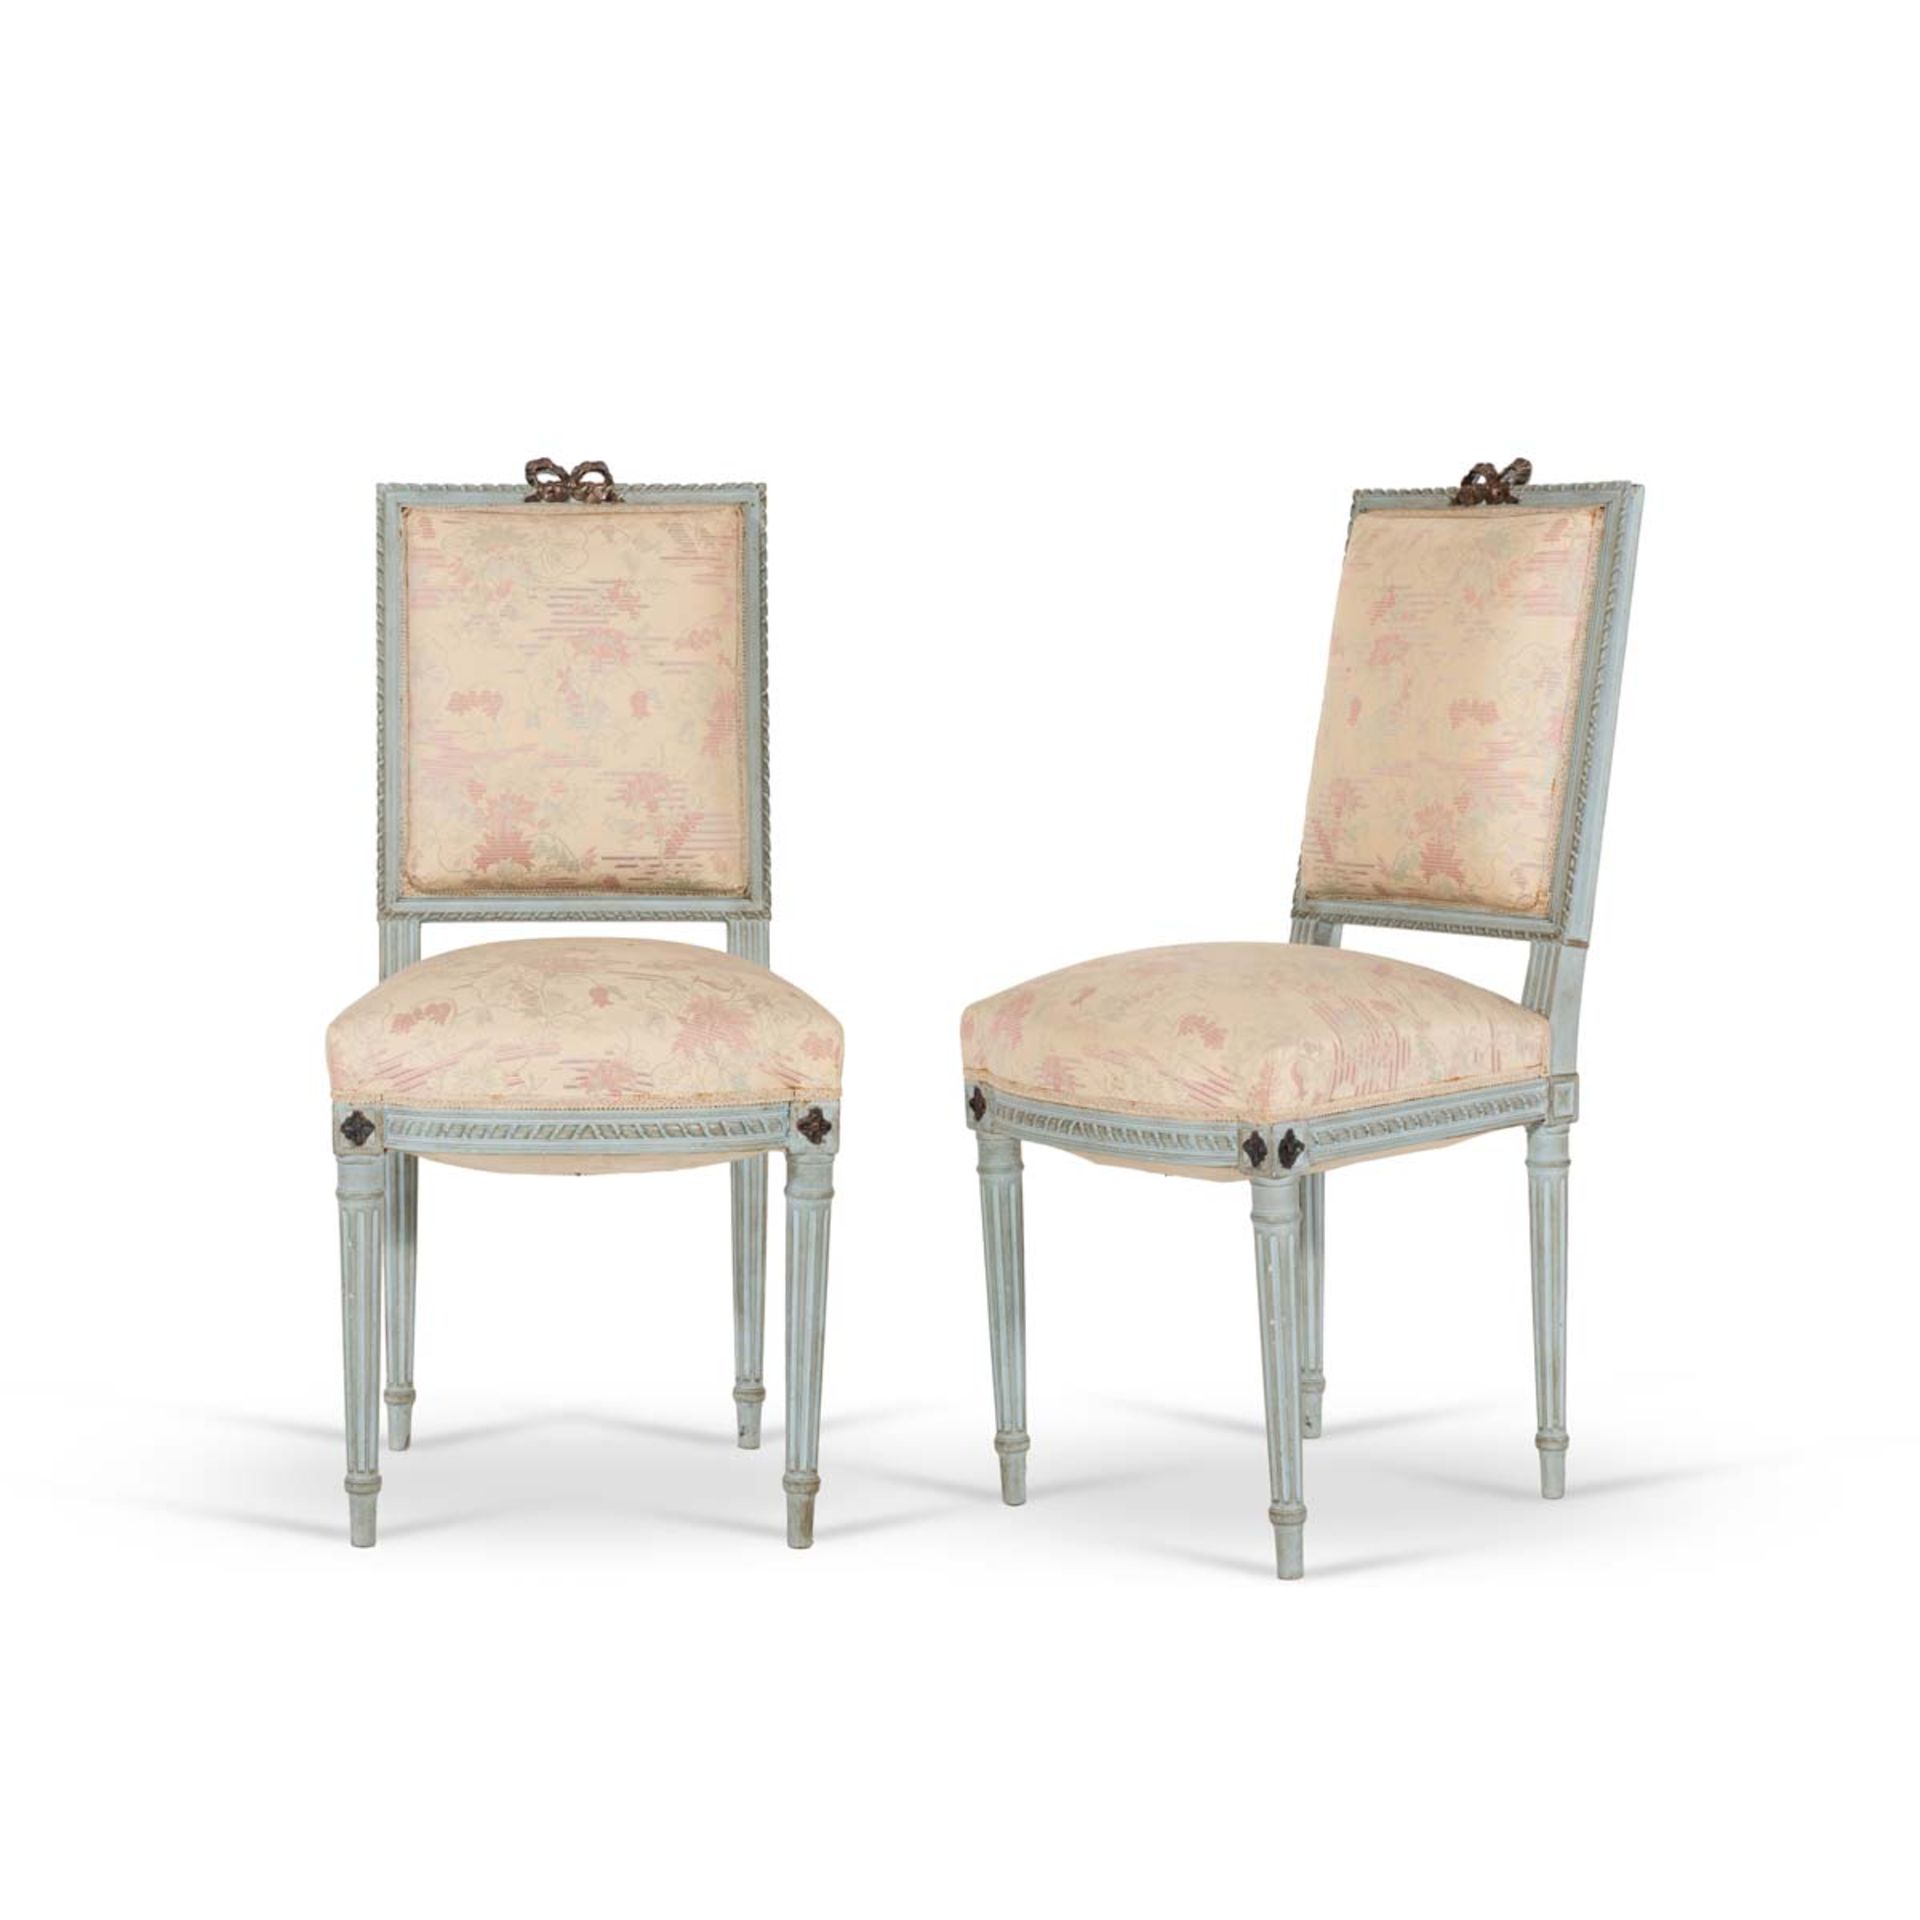 Pair of carved and lacquered chairs, 20th Century.